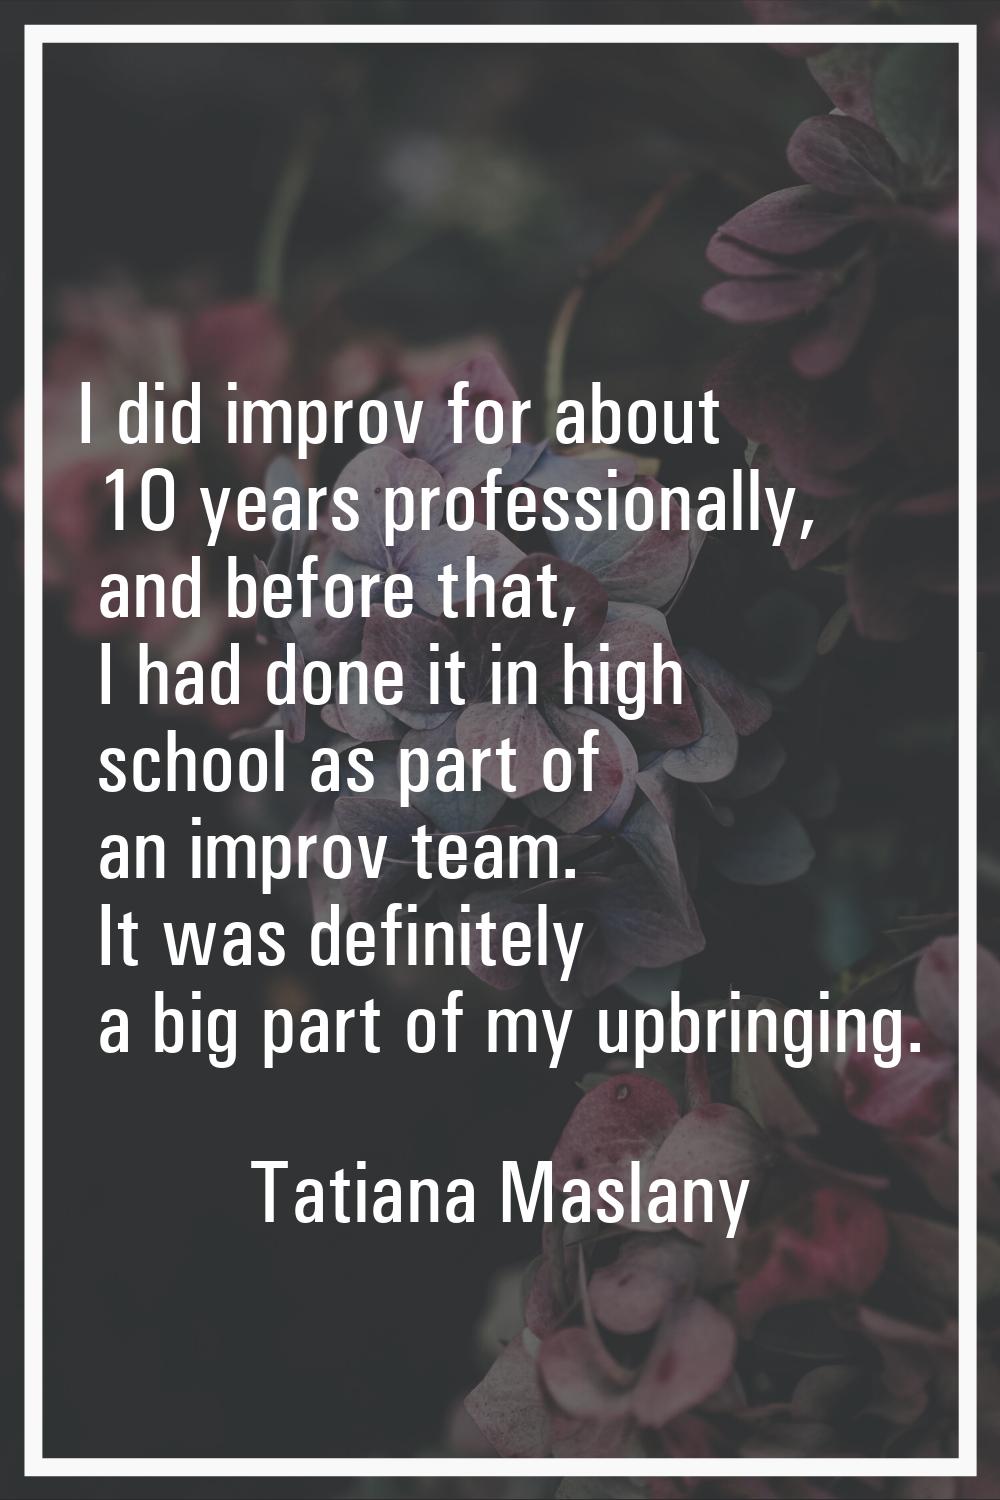 I did improv for about 10 years professionally, and before that, I had done it in high school as pa